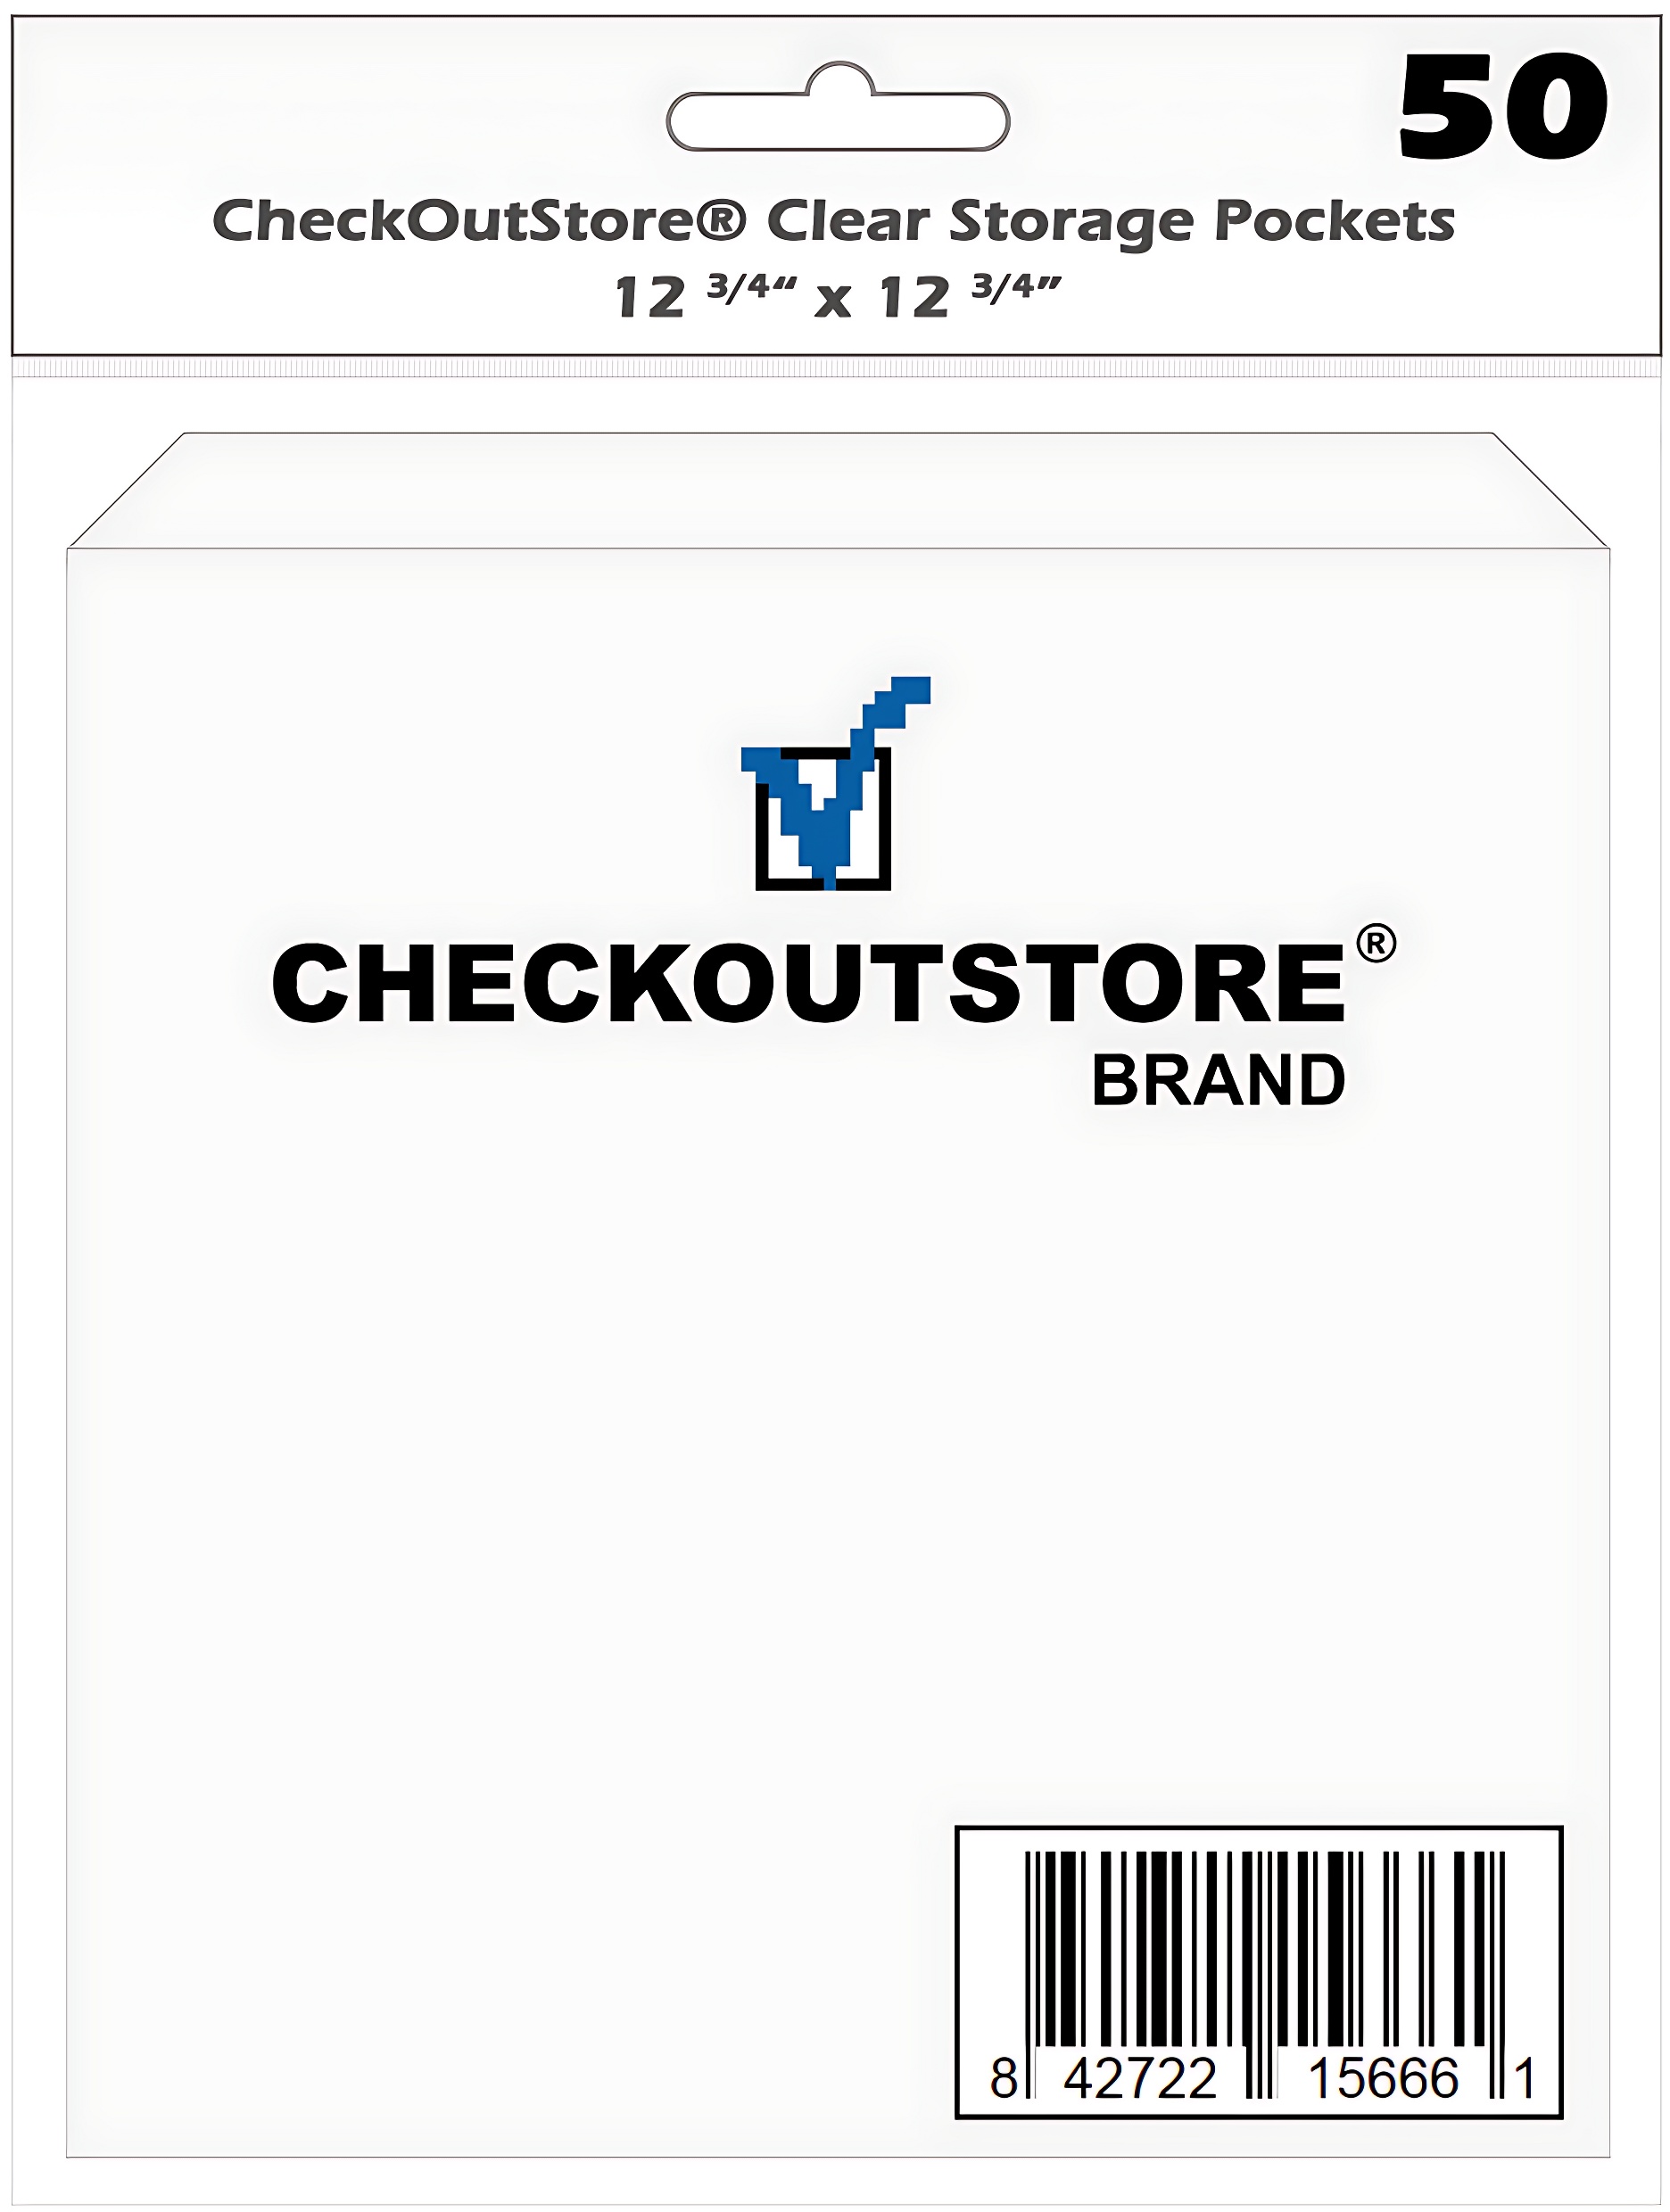 Image of ID 1214261418 1000 CheckOutStore Cardstock Clear Storage Pockets (12 3/4 x 12 3/4)